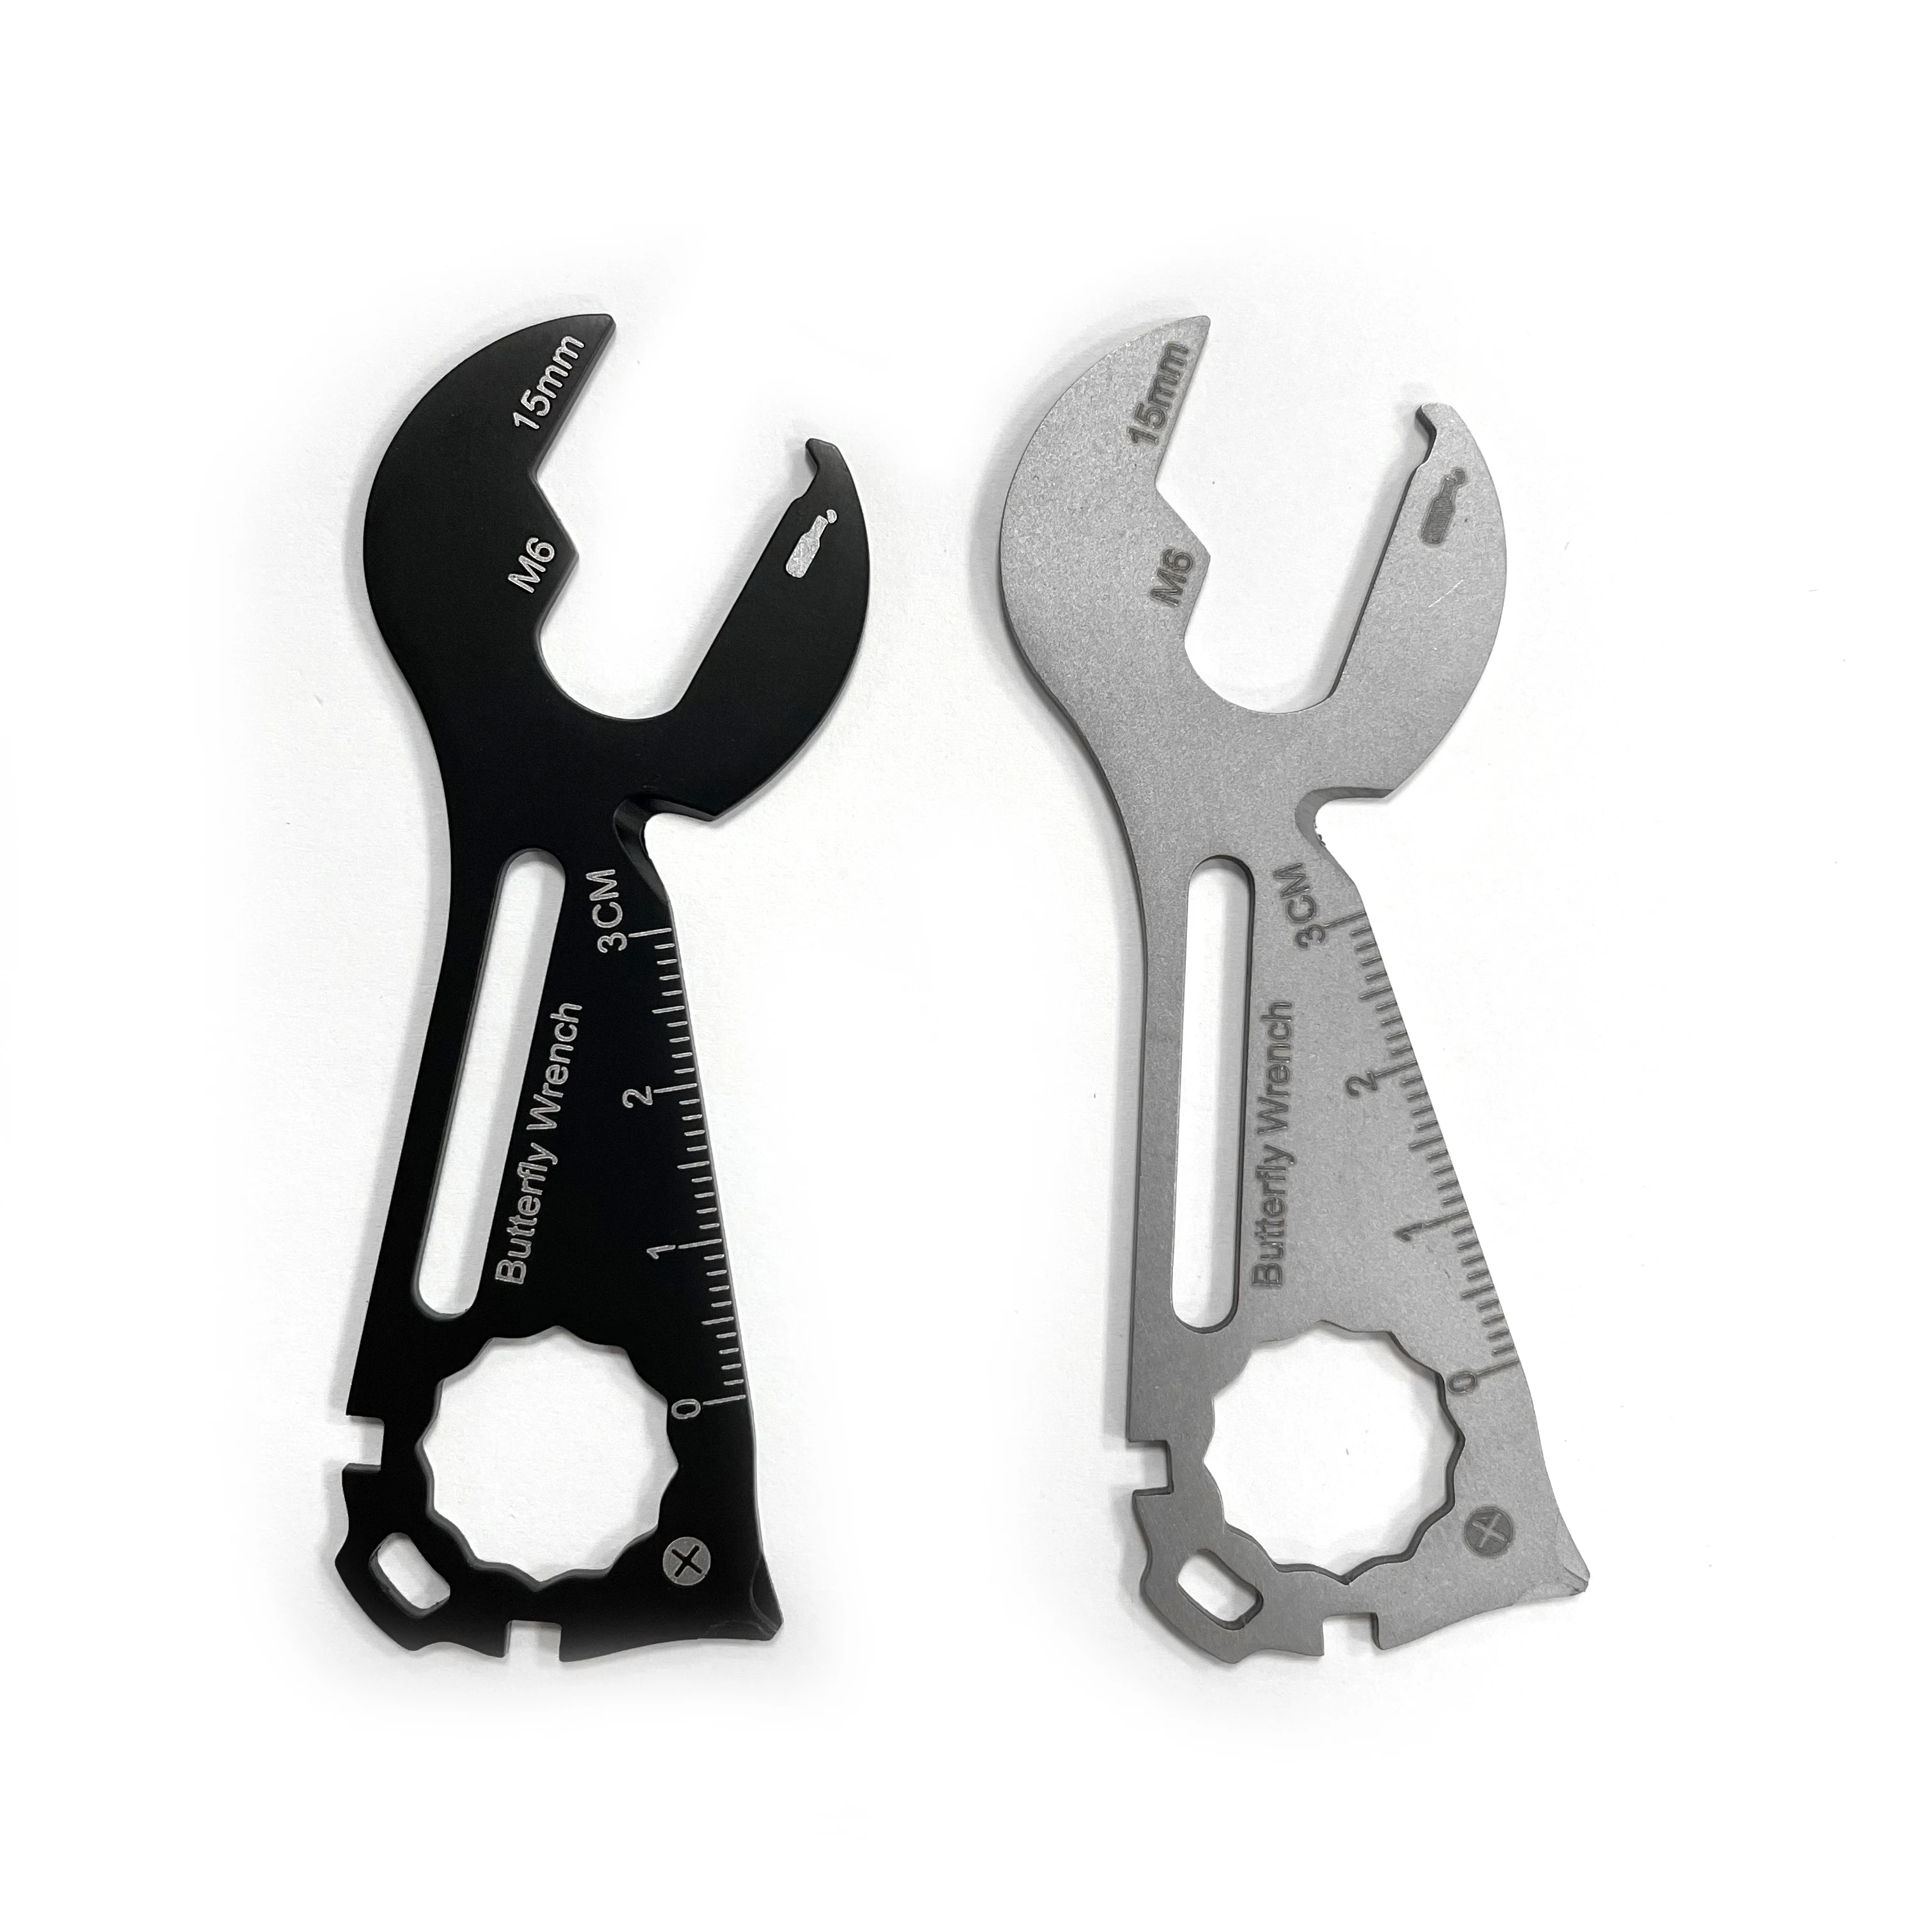 

New Product Ideas Multi Function Wrench Shape EDC Business Card Multi Tool